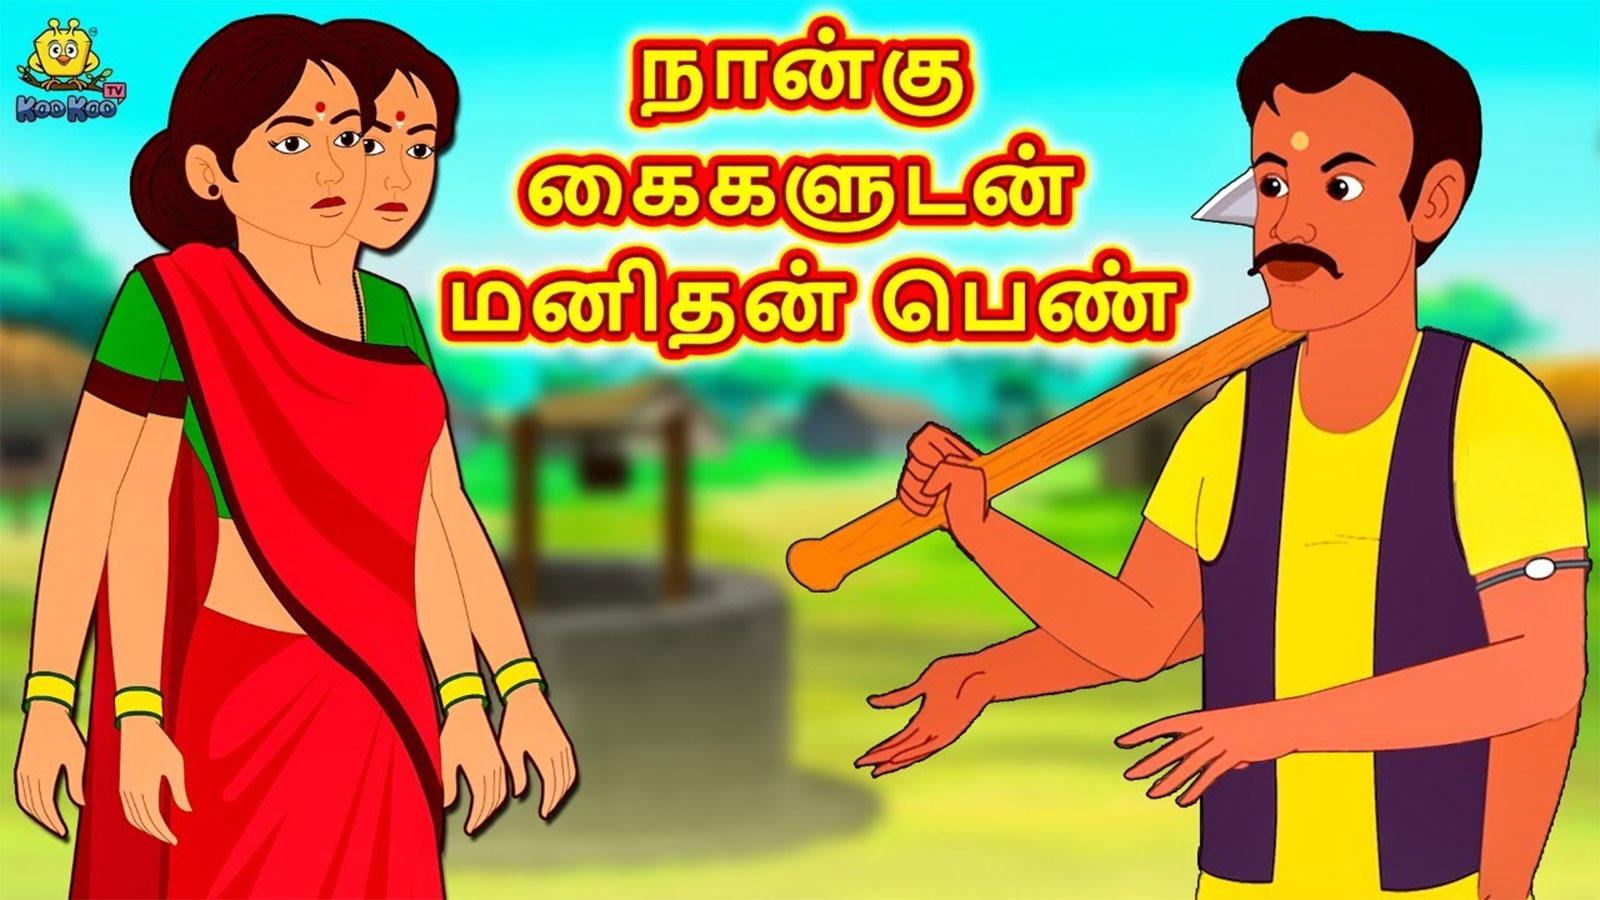 Watch Latest Children Tamil Nursery Story 'நான்கு கைகளுடன் மனிதன் பெண் - Man Woman With Four Hands' for Kids - Watch Children's Nursery Stories, Baby Songs, Fairy Tales In Tamil | Entertainment -